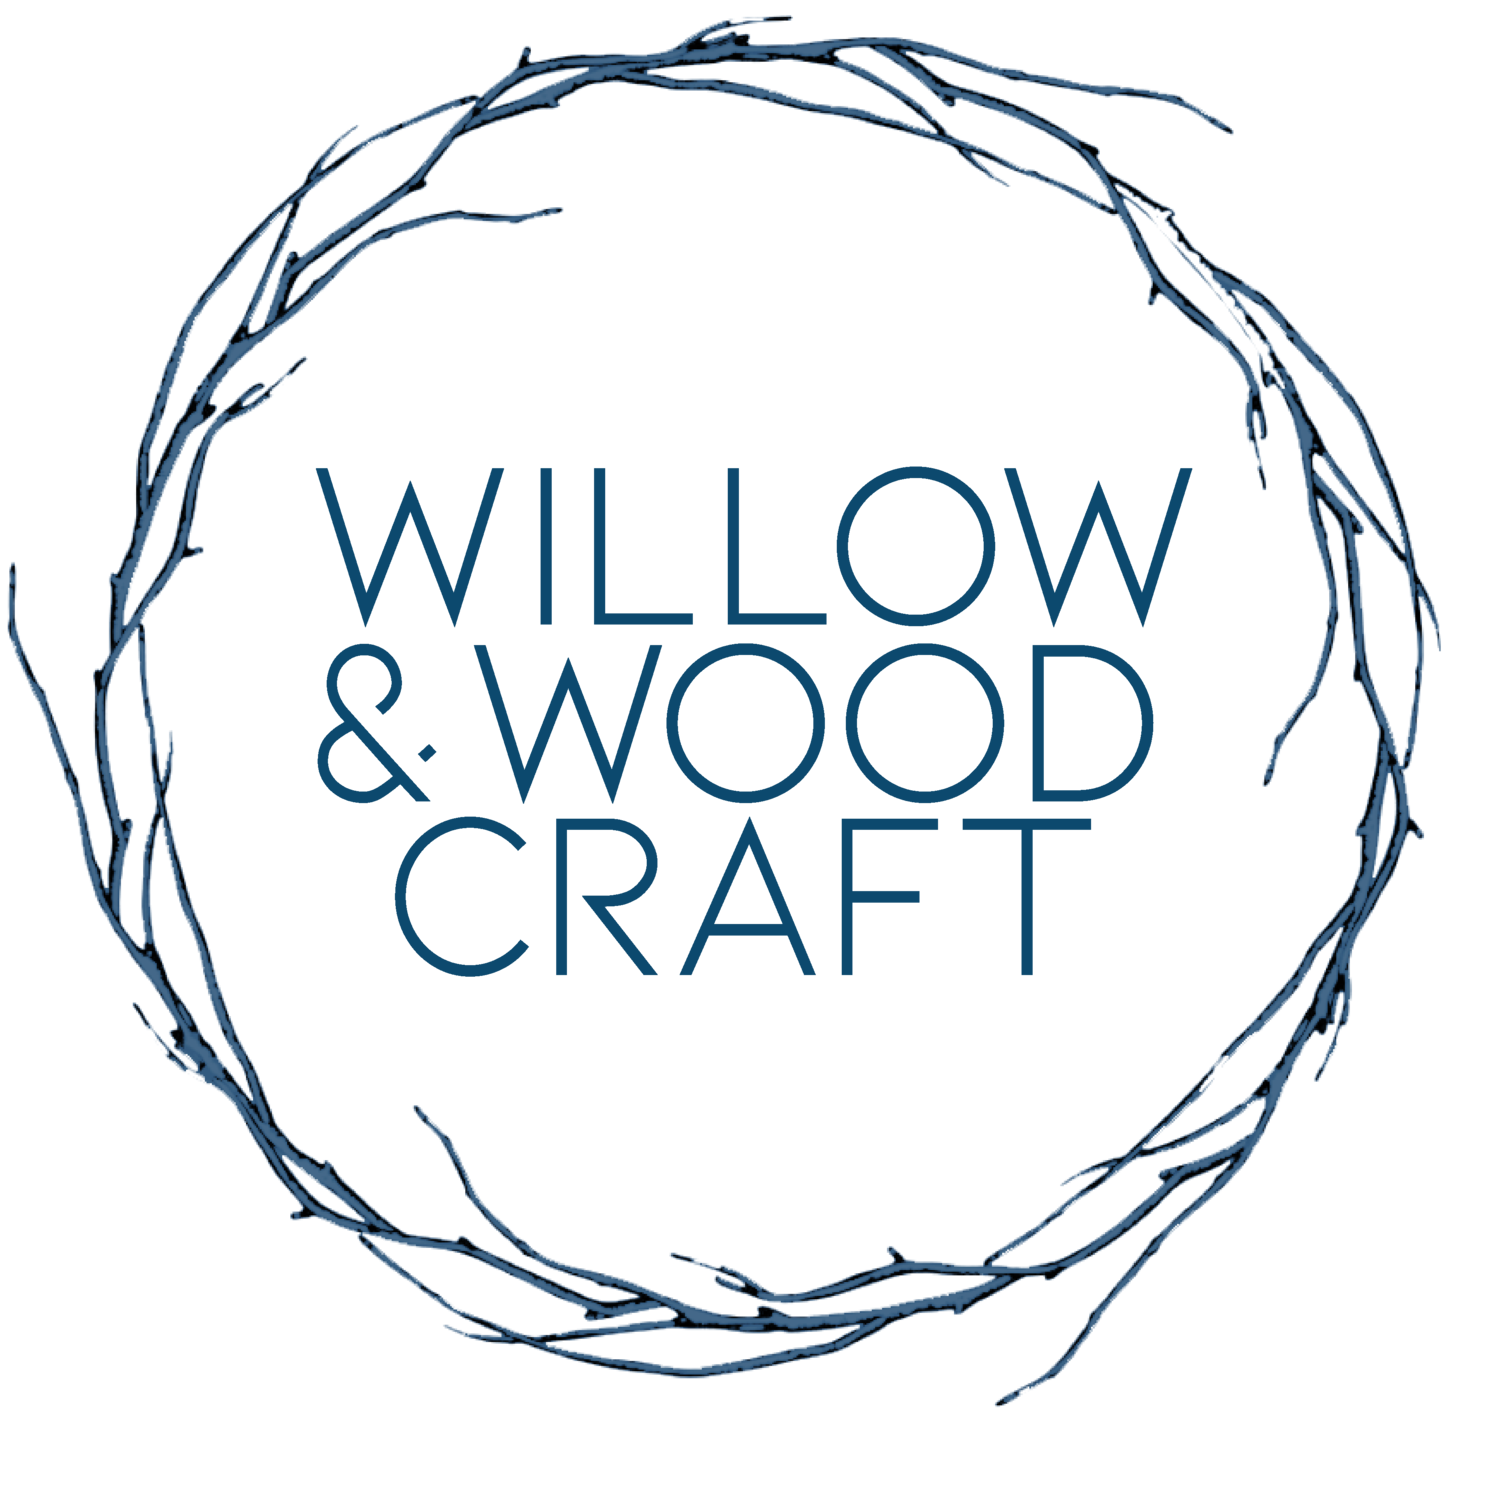 Willow & Wood Craft